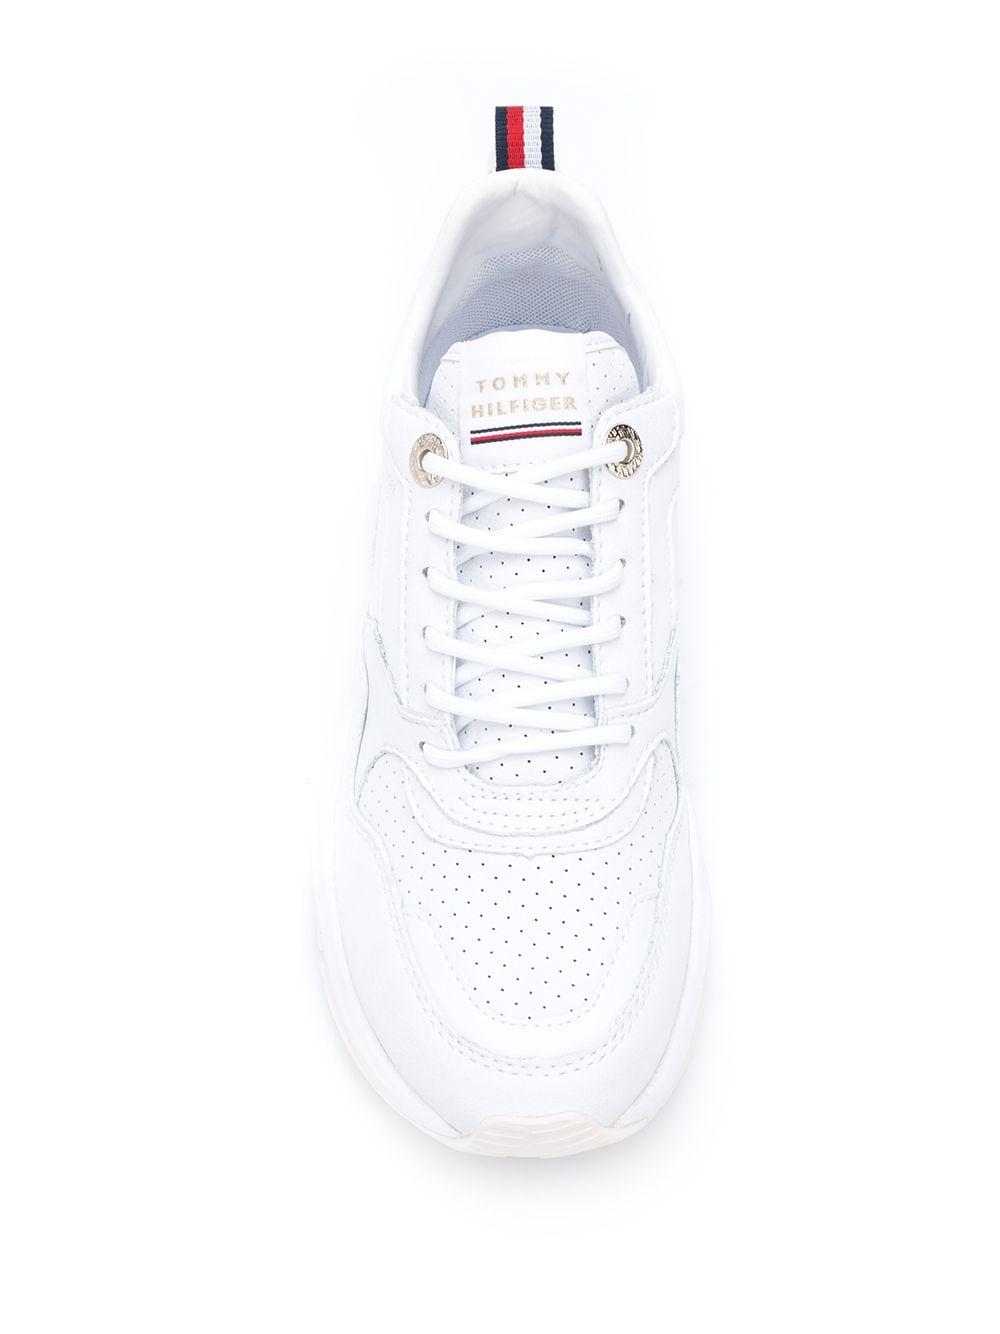 Tommy Hilfiger Leather Chunky Sole Internal Wedge Sneakers in White | Lyst